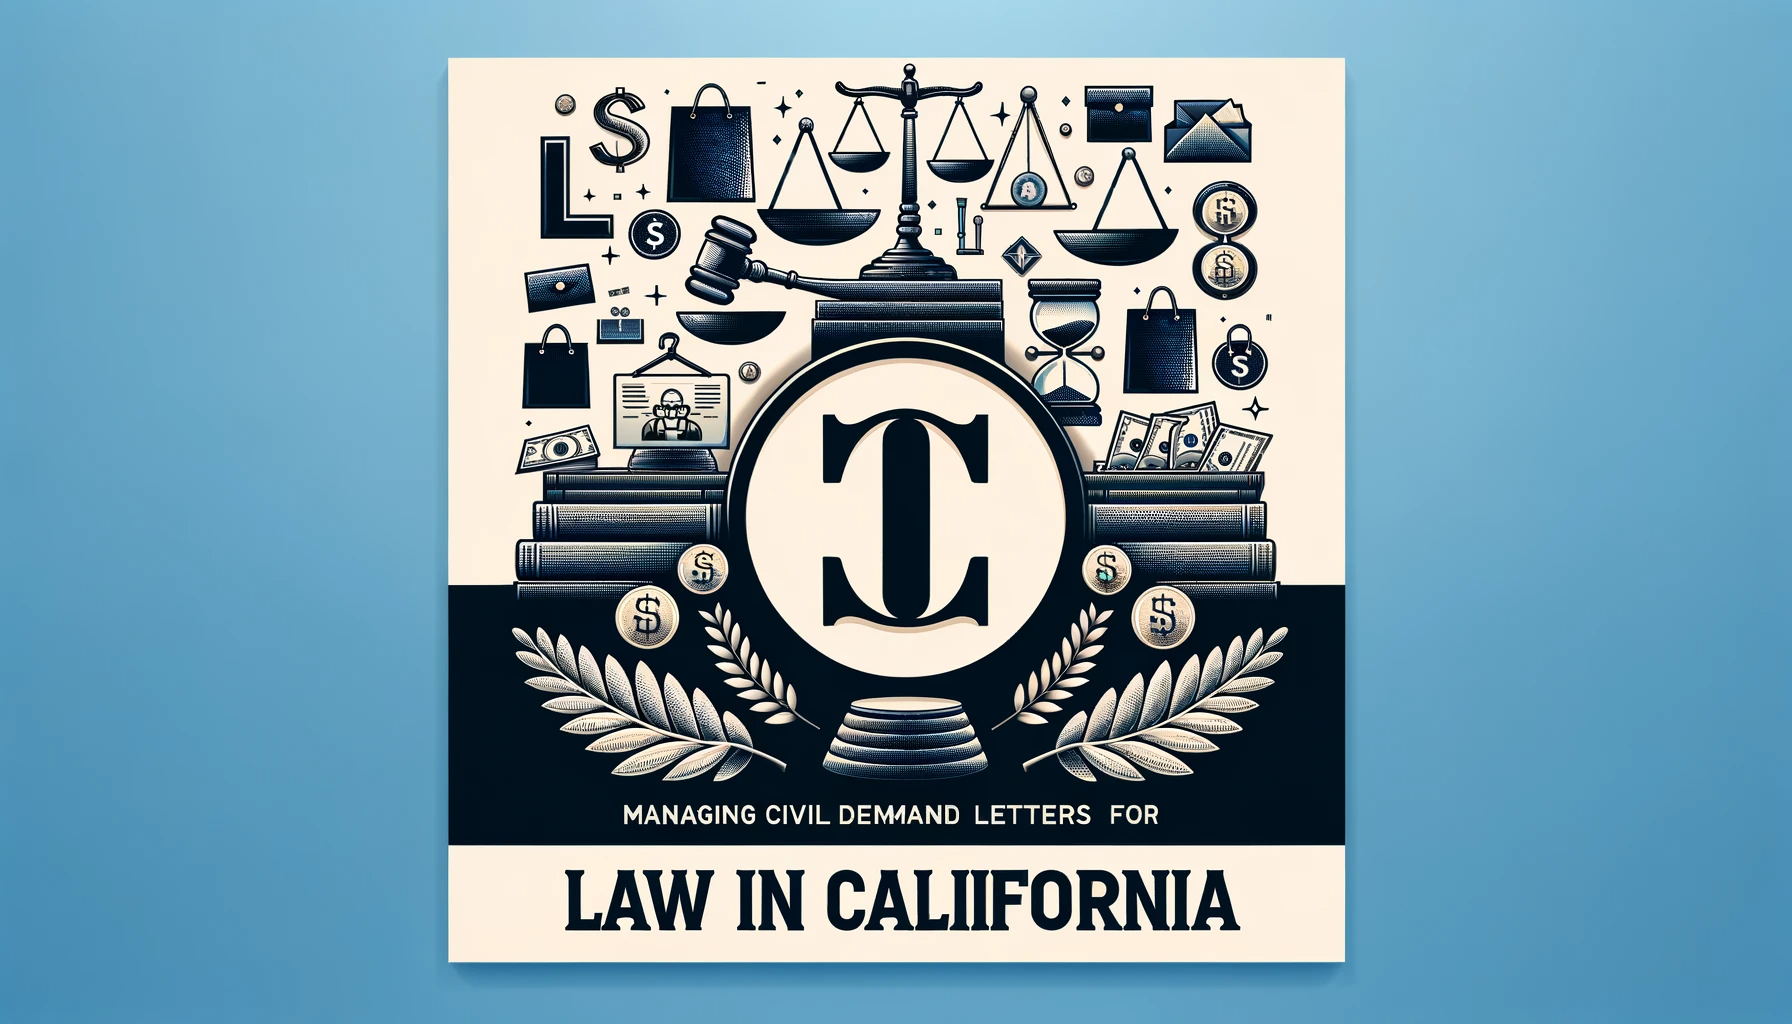 How to manage Civil Demand Letters for Shoplifting Law in California